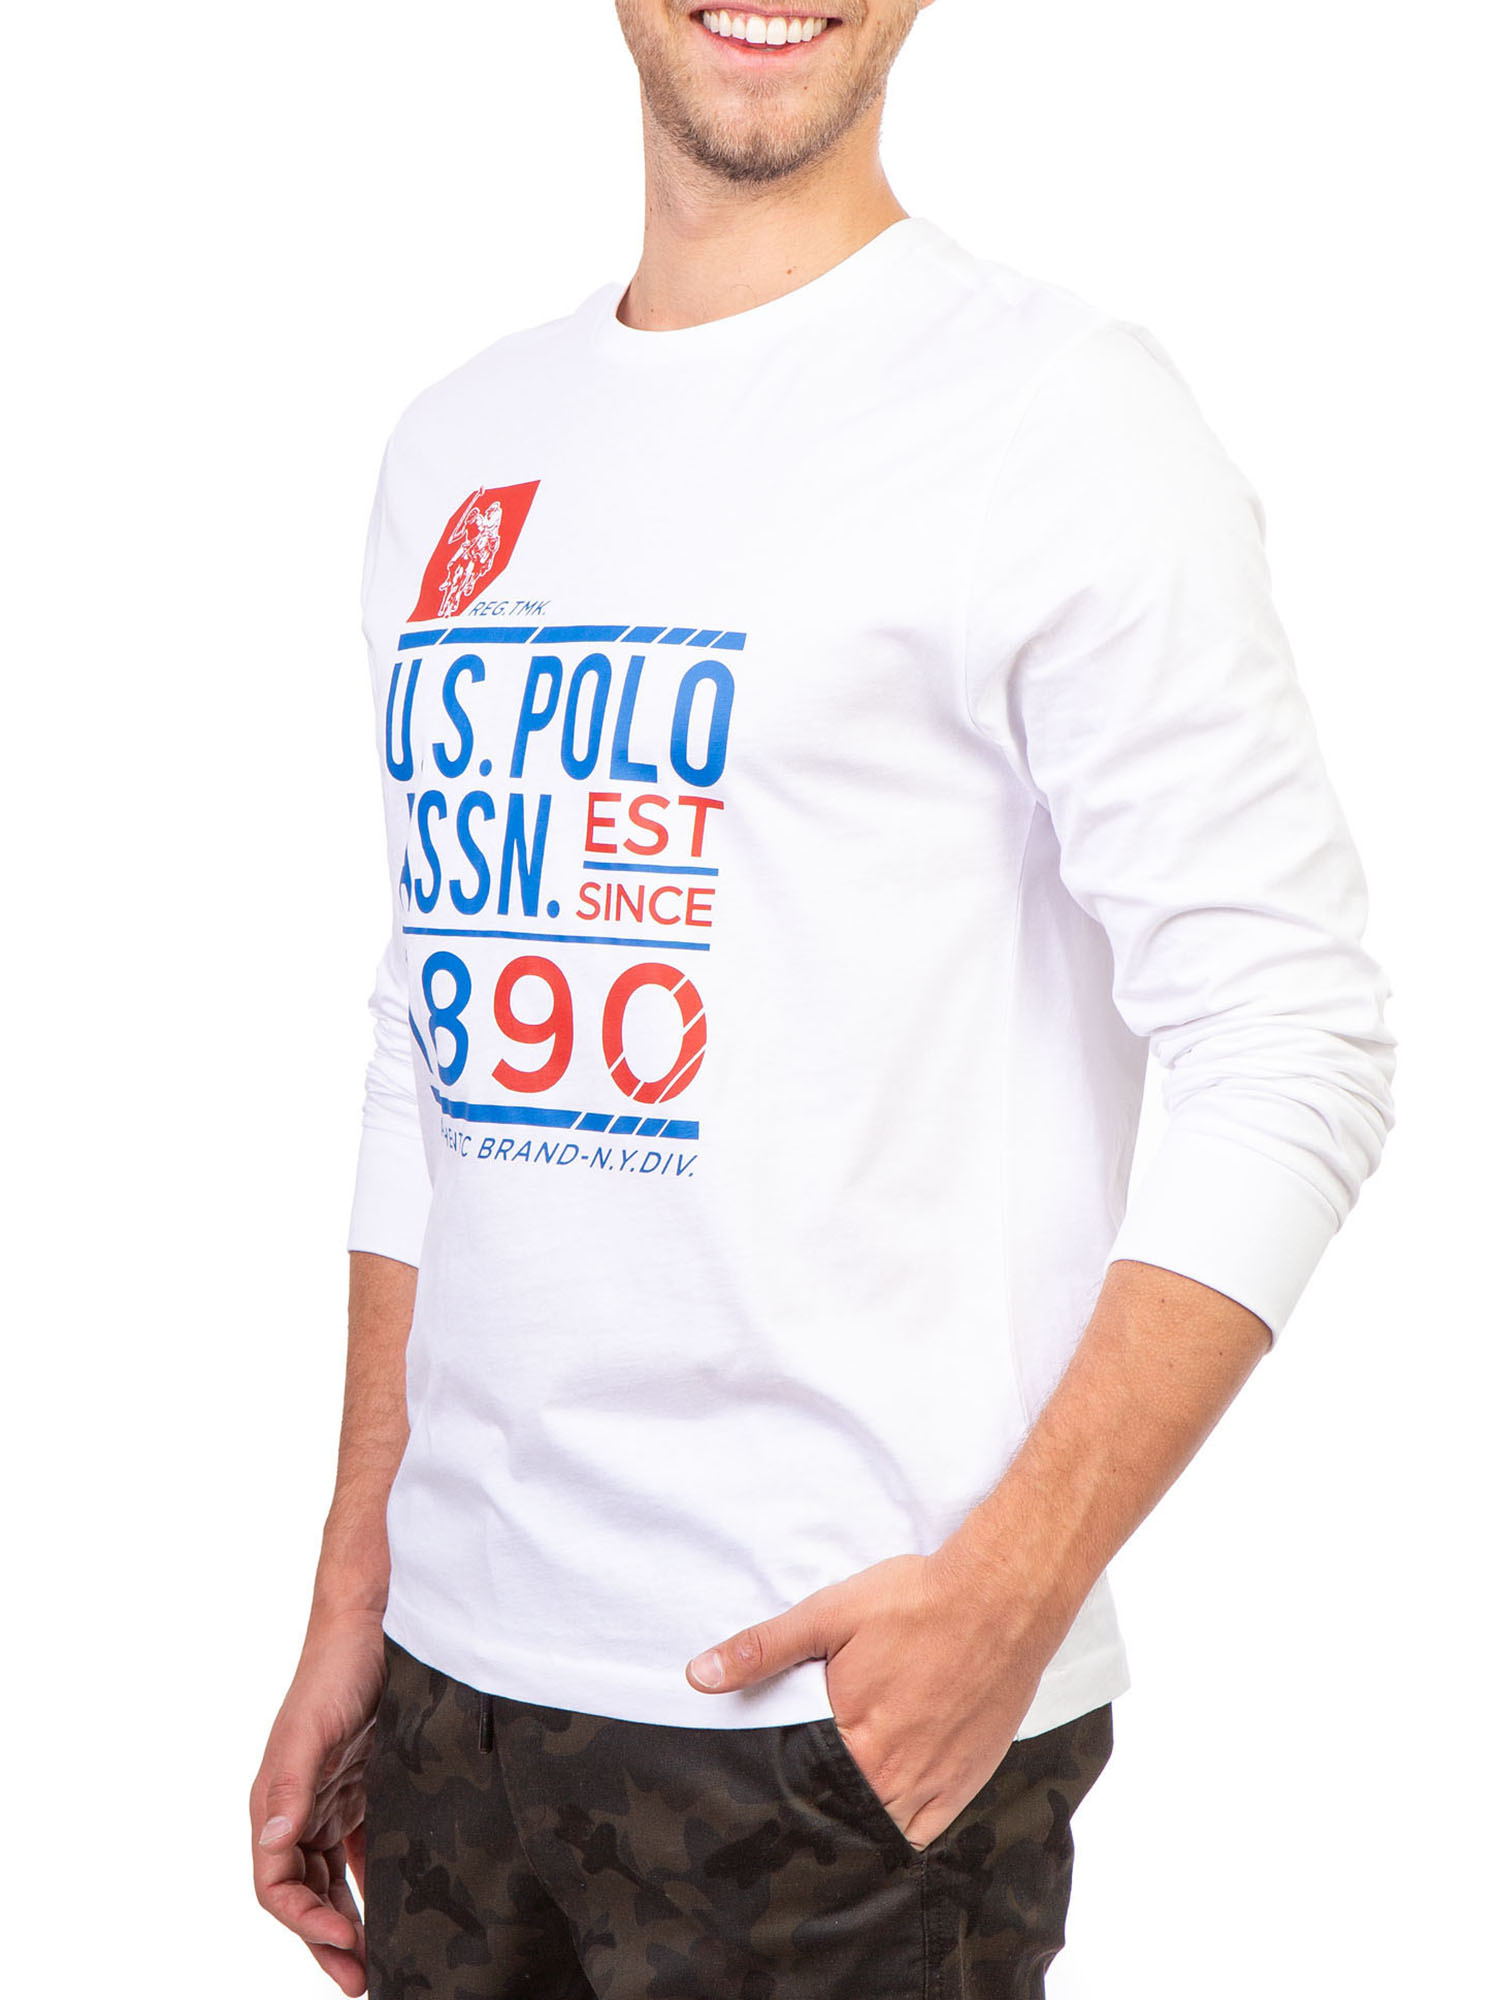 U.S. Polo Assn. Men's and Big Men's Long Sleeve Graphic T-Shirt - image 2 of 3